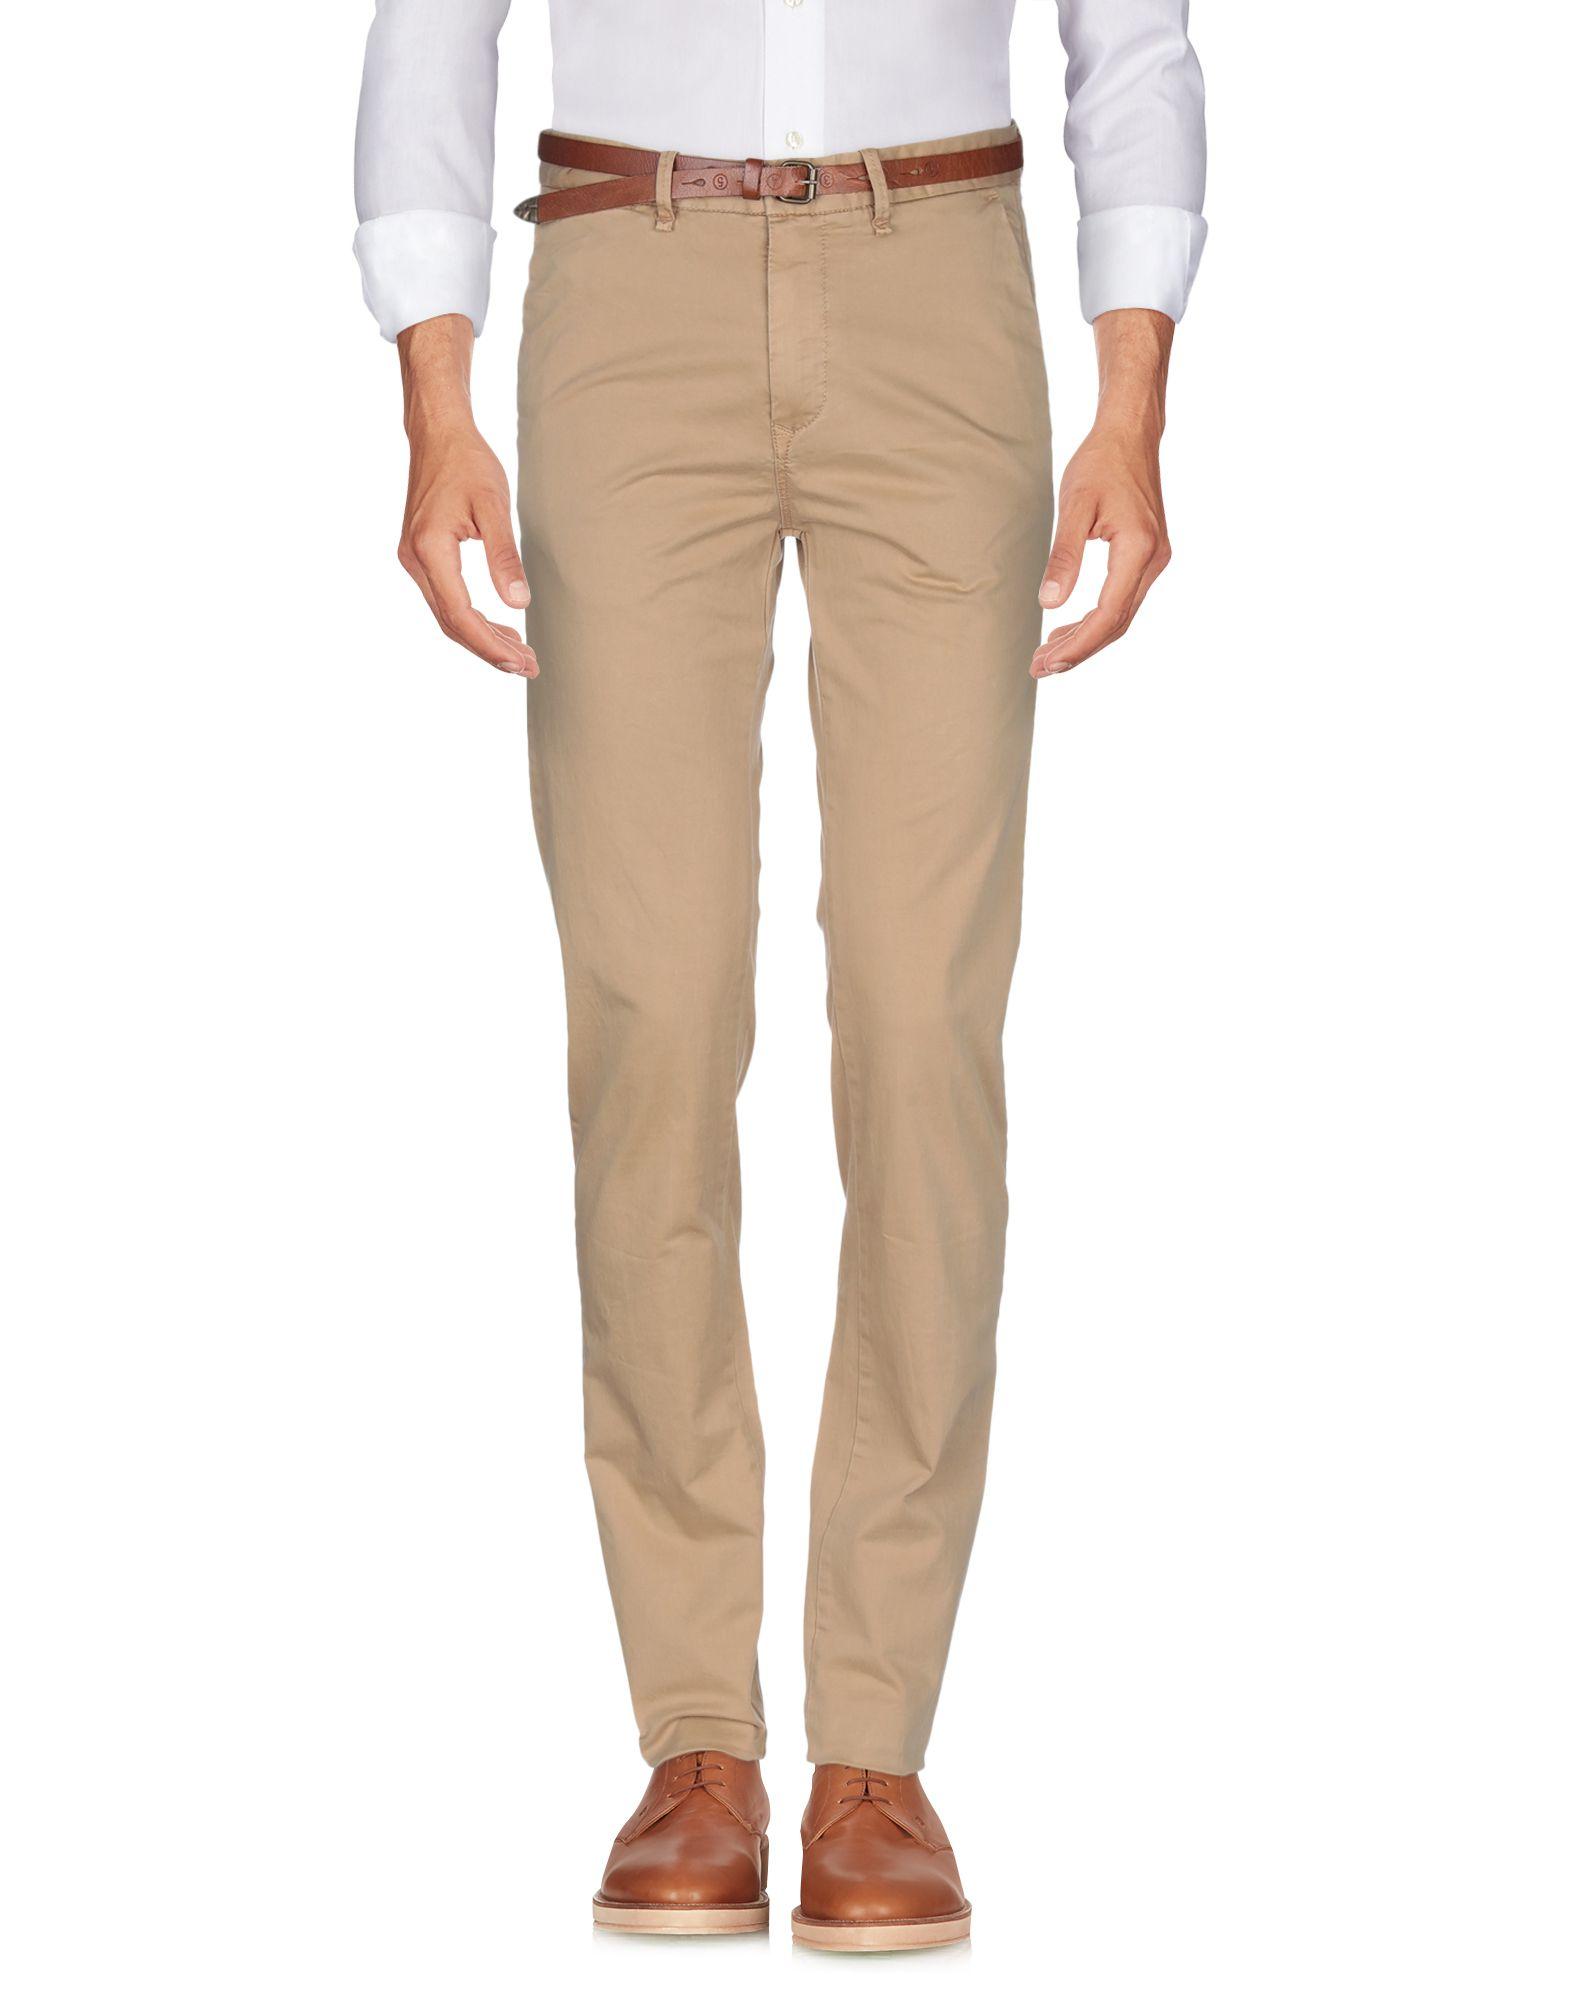 Scotch & Soda Casual Pants in Sand (Natural) for Men - Lyst